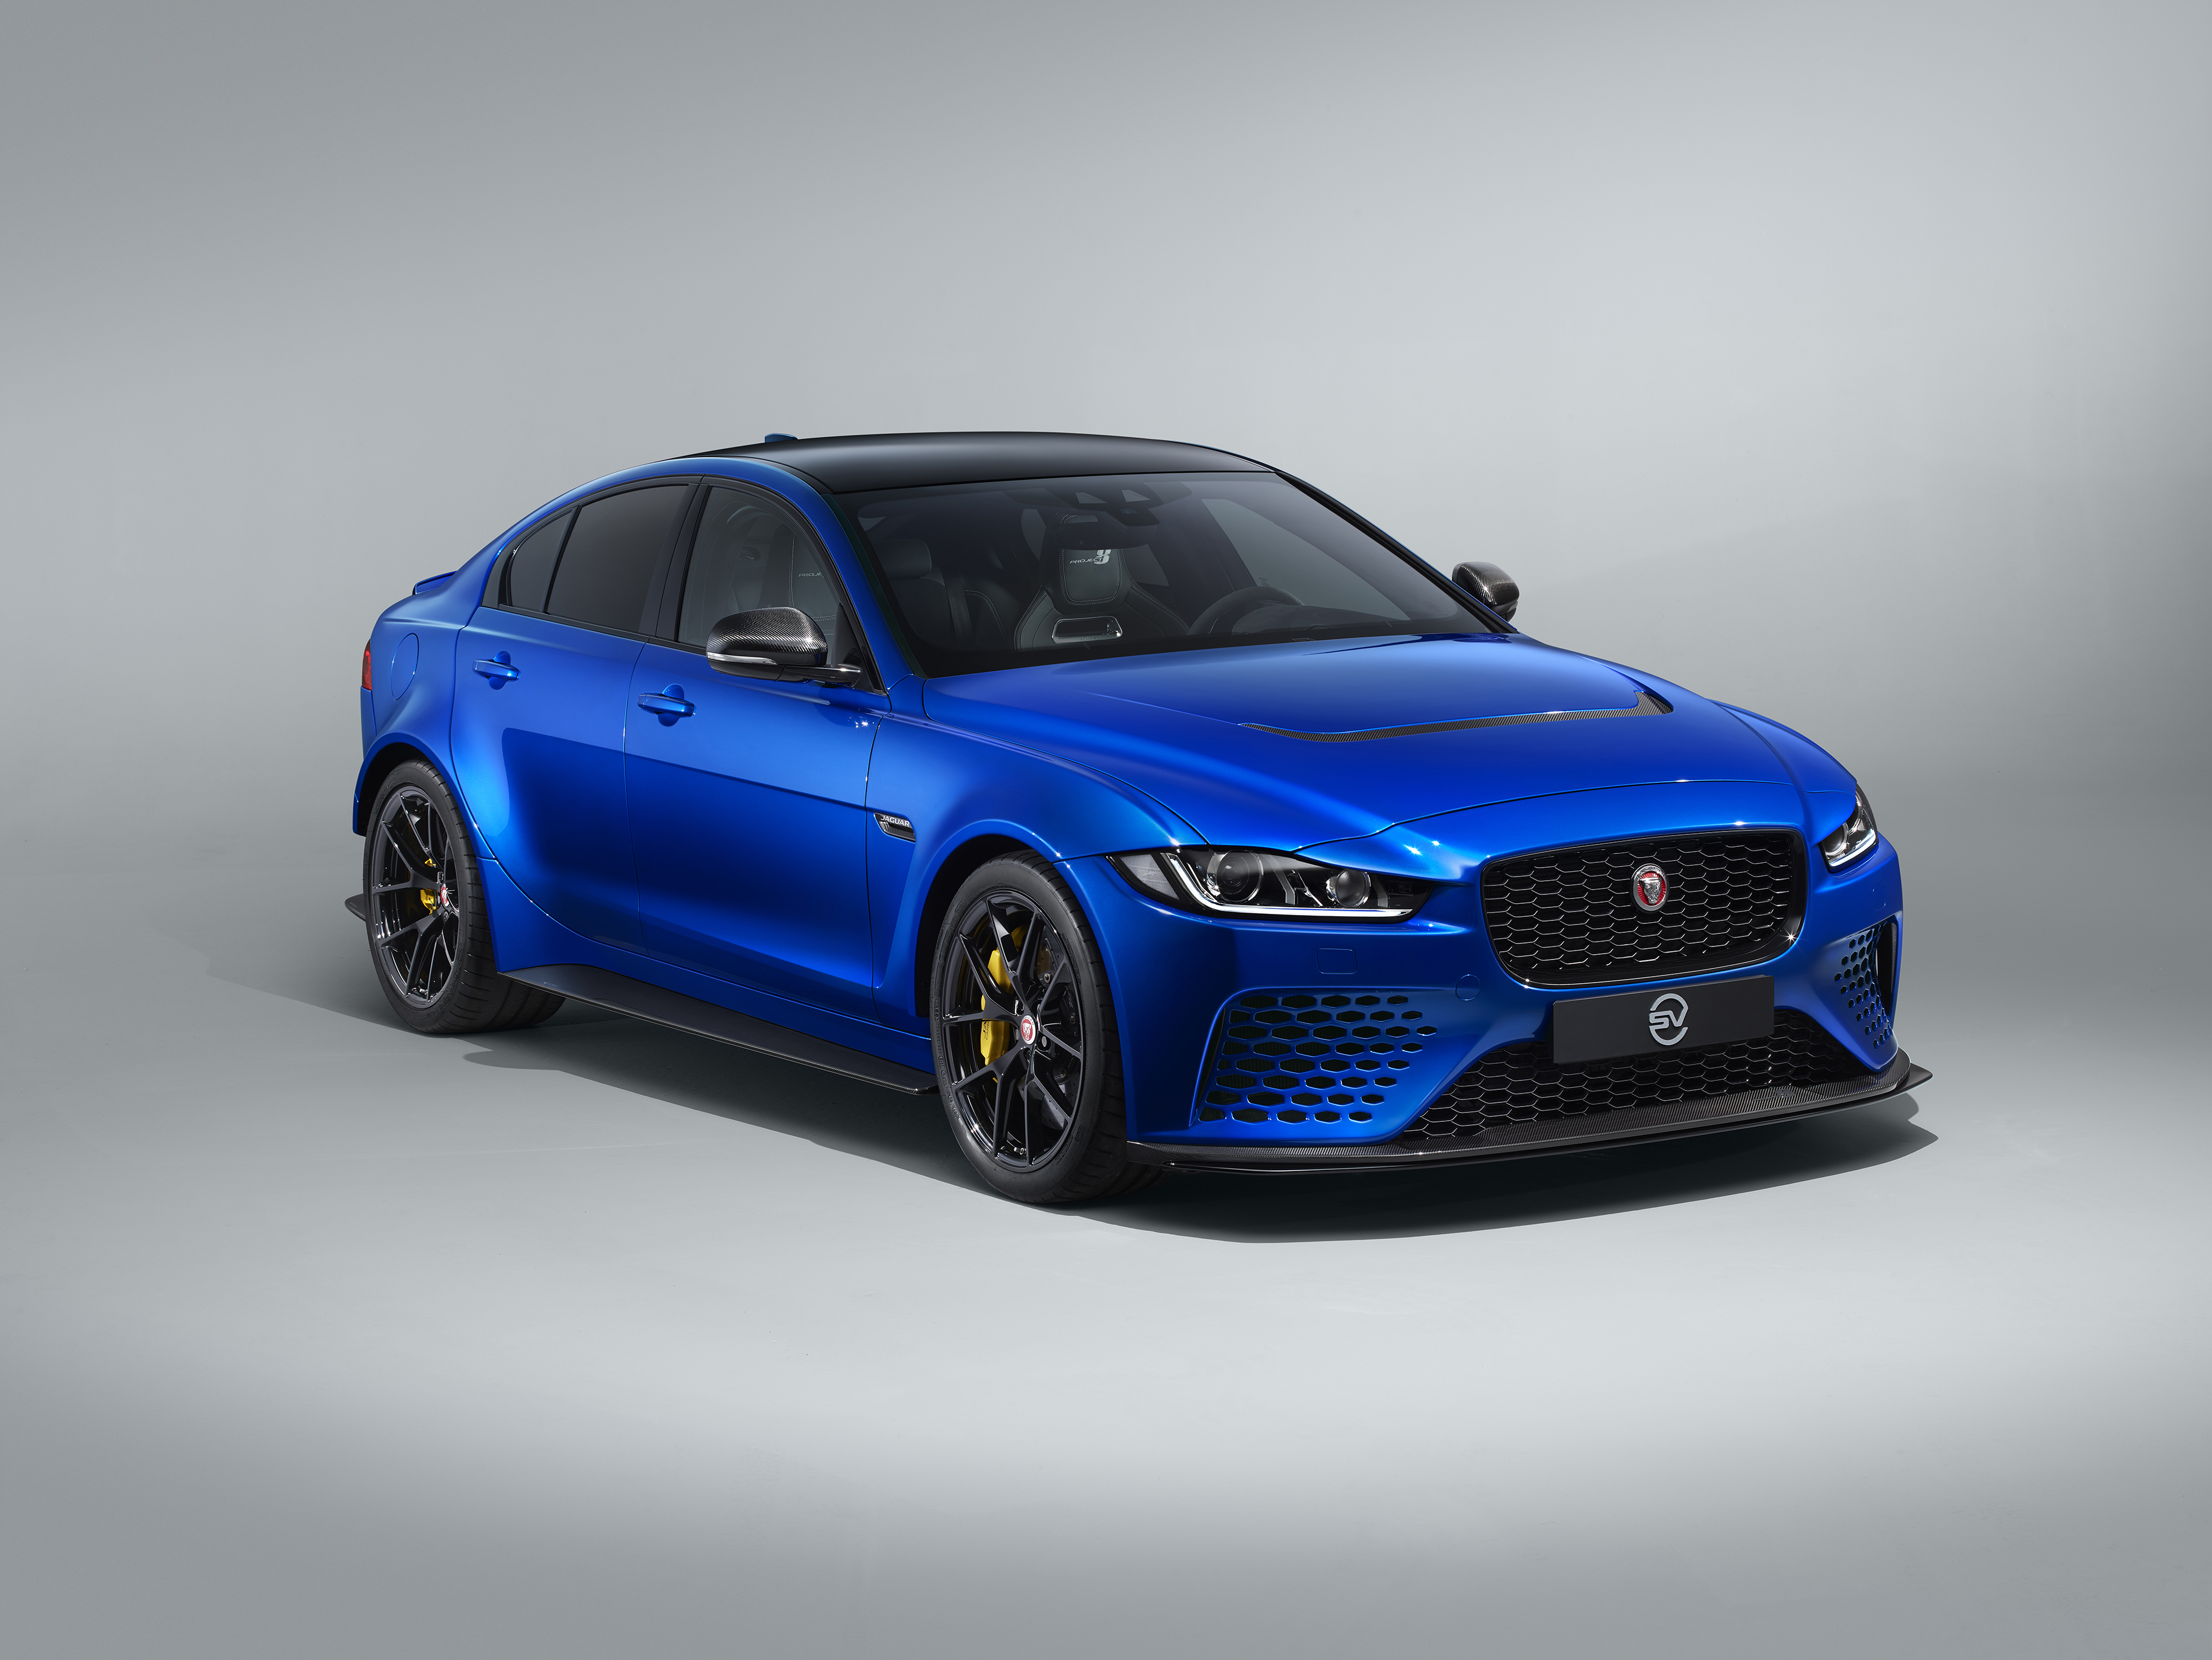 THE ULTIMATE Q-CAR: NEW TOURING SPECIFICATION FOR WORLD'S FASTEST  PRODUCTION SEDAN, JAGUAR XE SV PROJECT 8 | Land Rover Media Newsroom